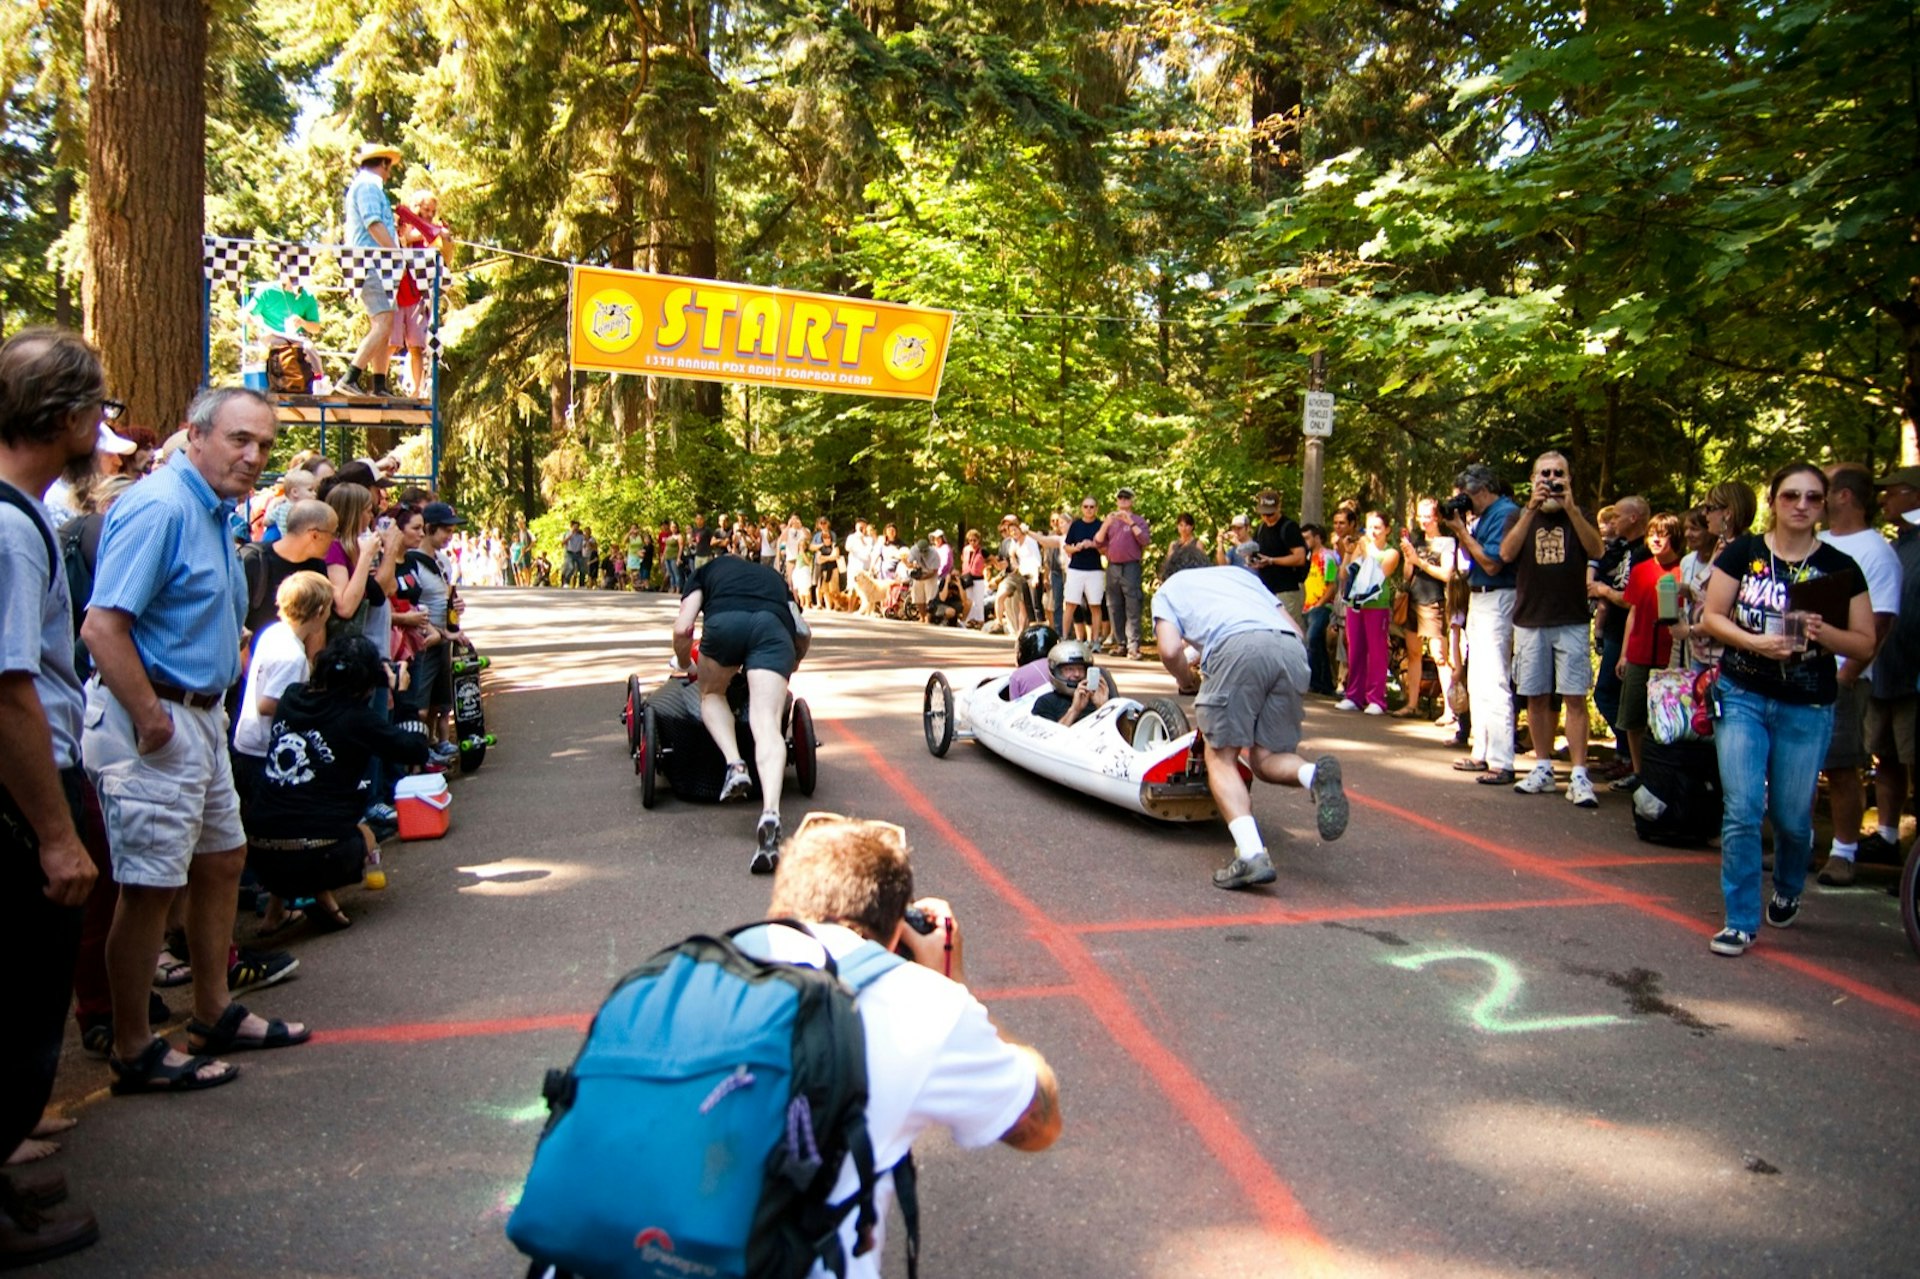 People push very sleek soapbox cars through a forested area on a road with lanes painted on it